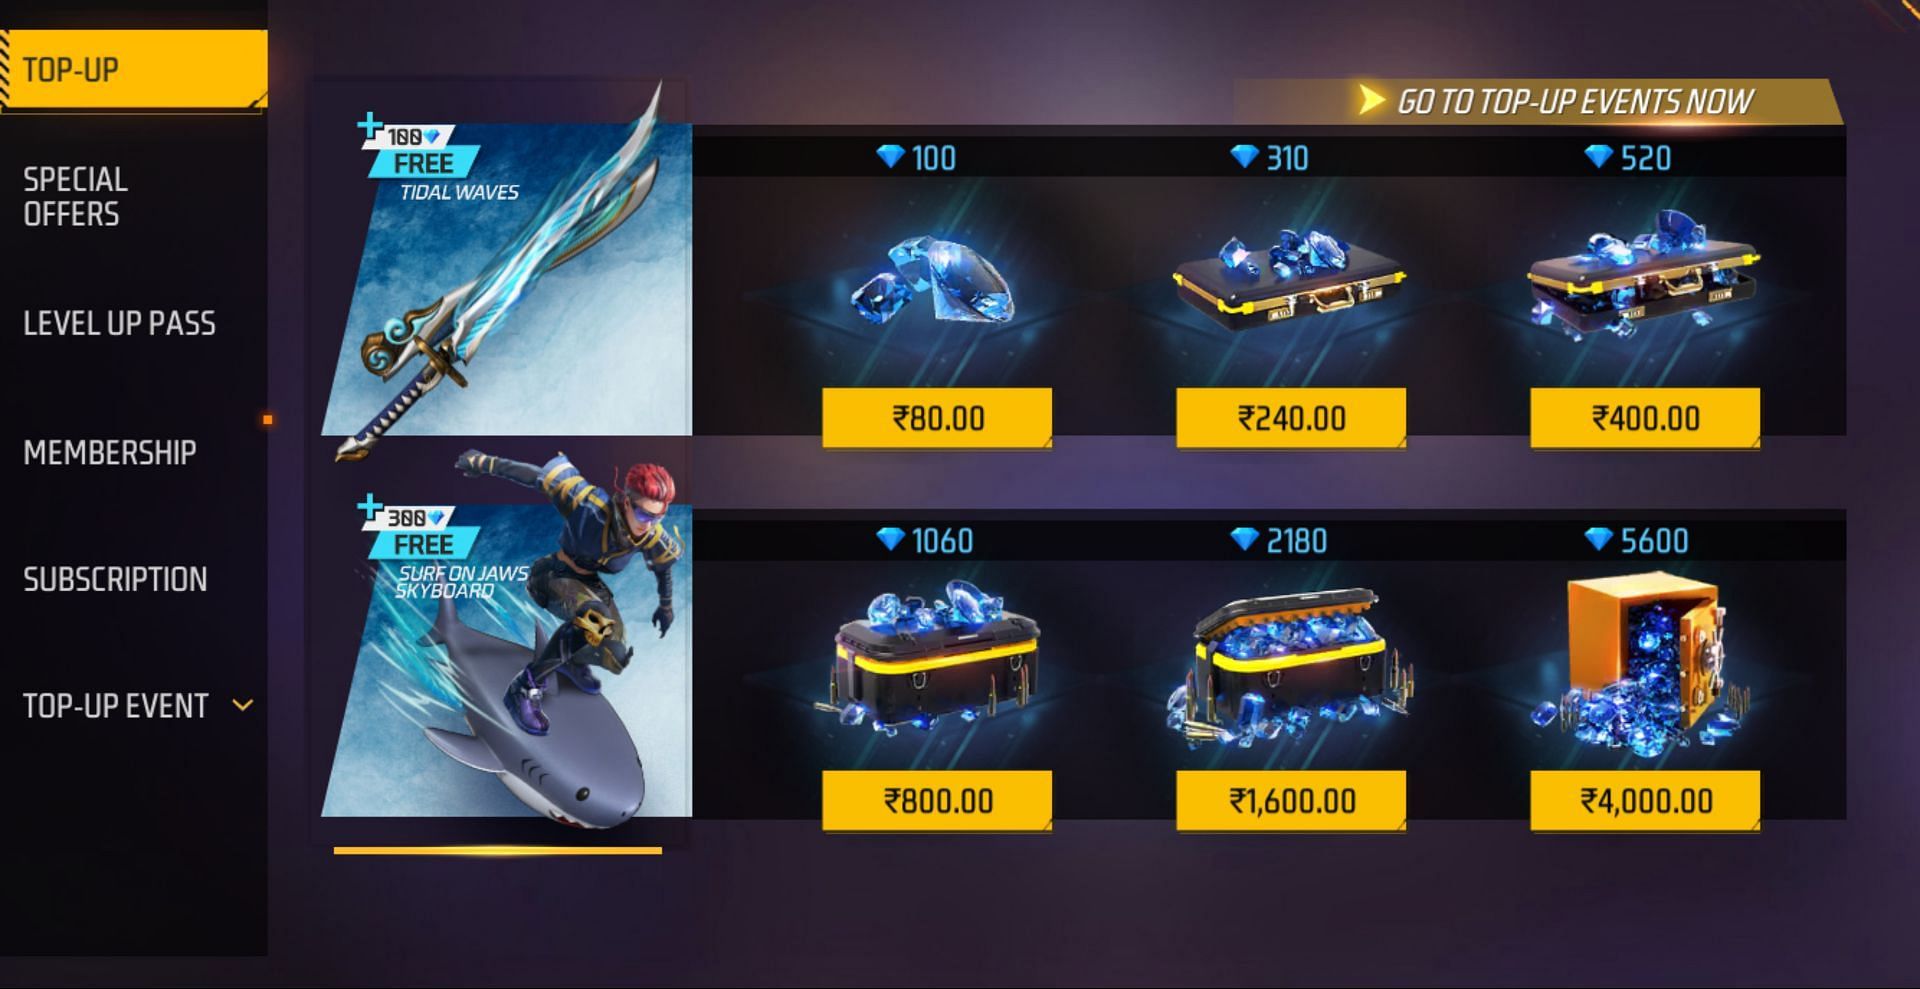 The in-game top-up center enables you to purchase diamonds inside the game. (Image via Garena)